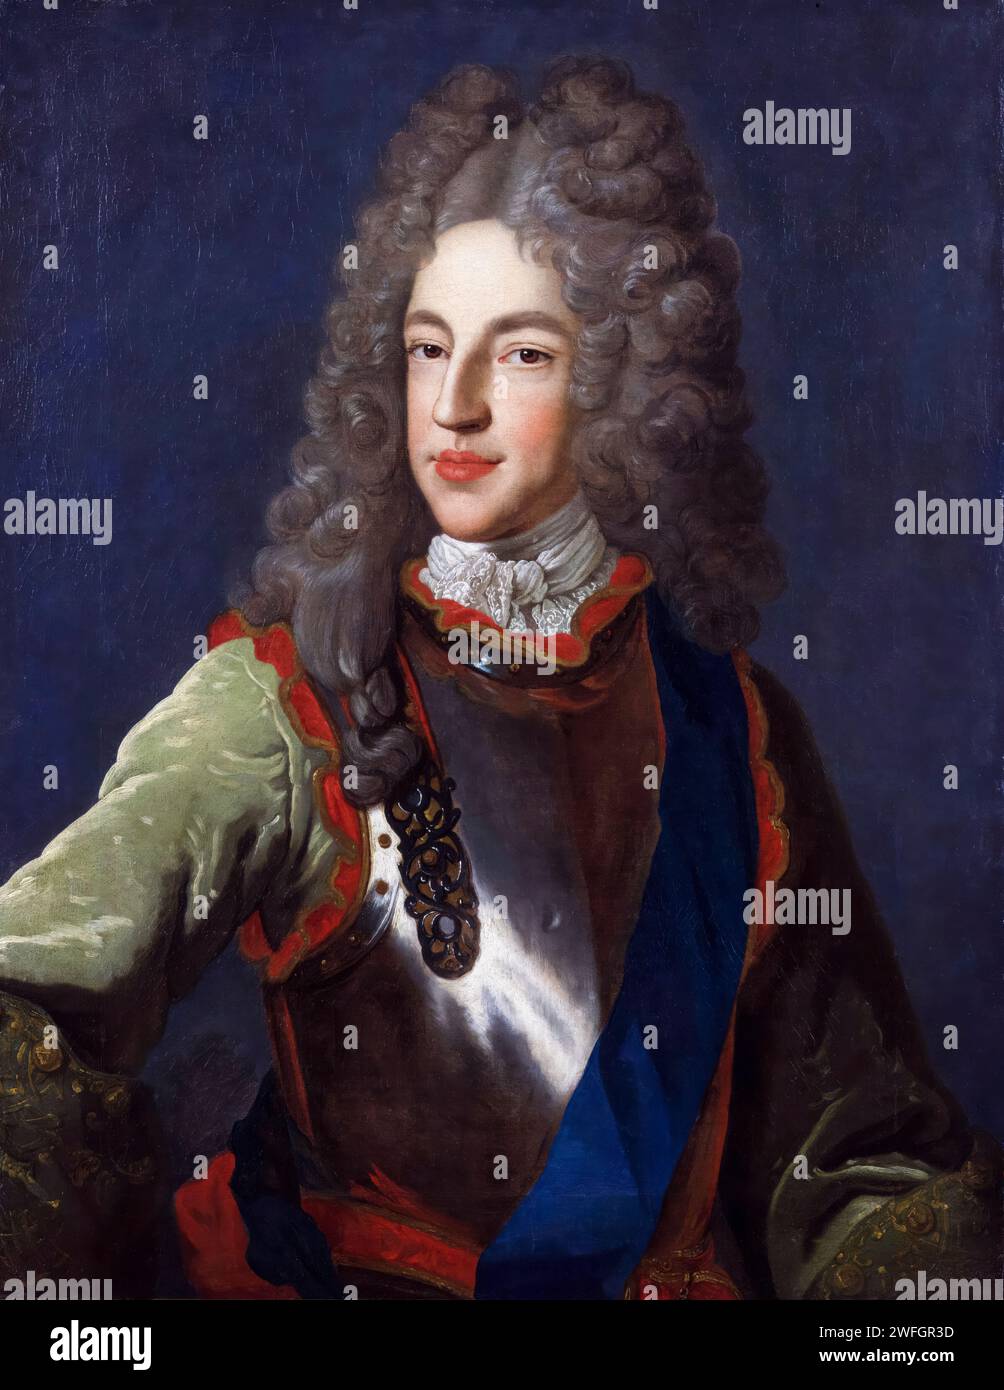 Prince James Francis Edward Stuart (1688-1766), nicknamed 'The Old Pretender', portrait painting in oil on canvas by the workshop of Alexis Simon Belle, circa 1712 Stock Photo